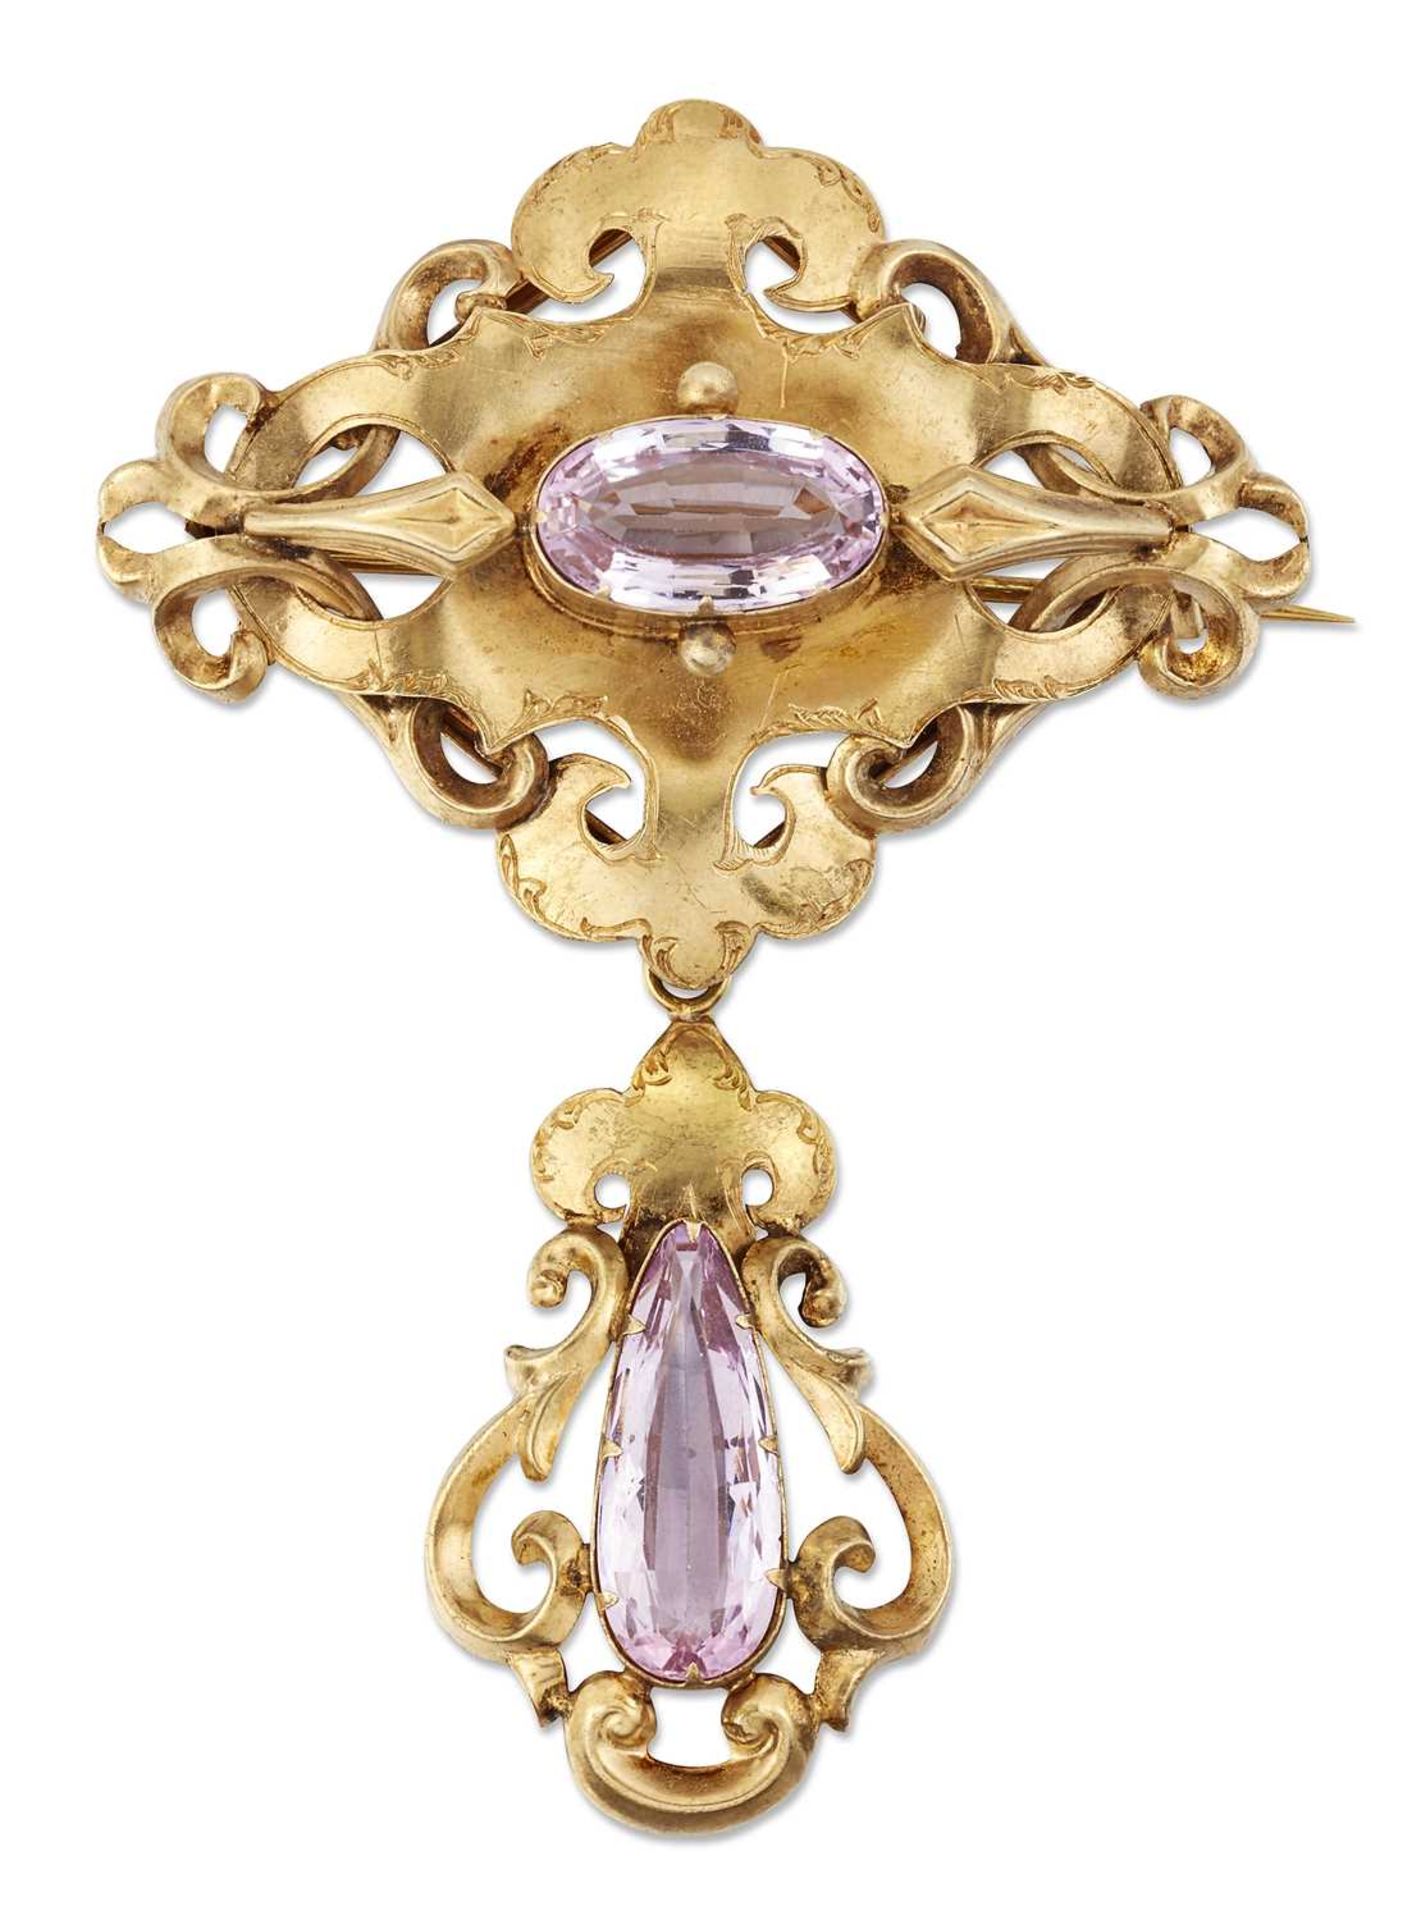 AN EARLY 19TH CENTURY PINK TOPAZ BROOCH